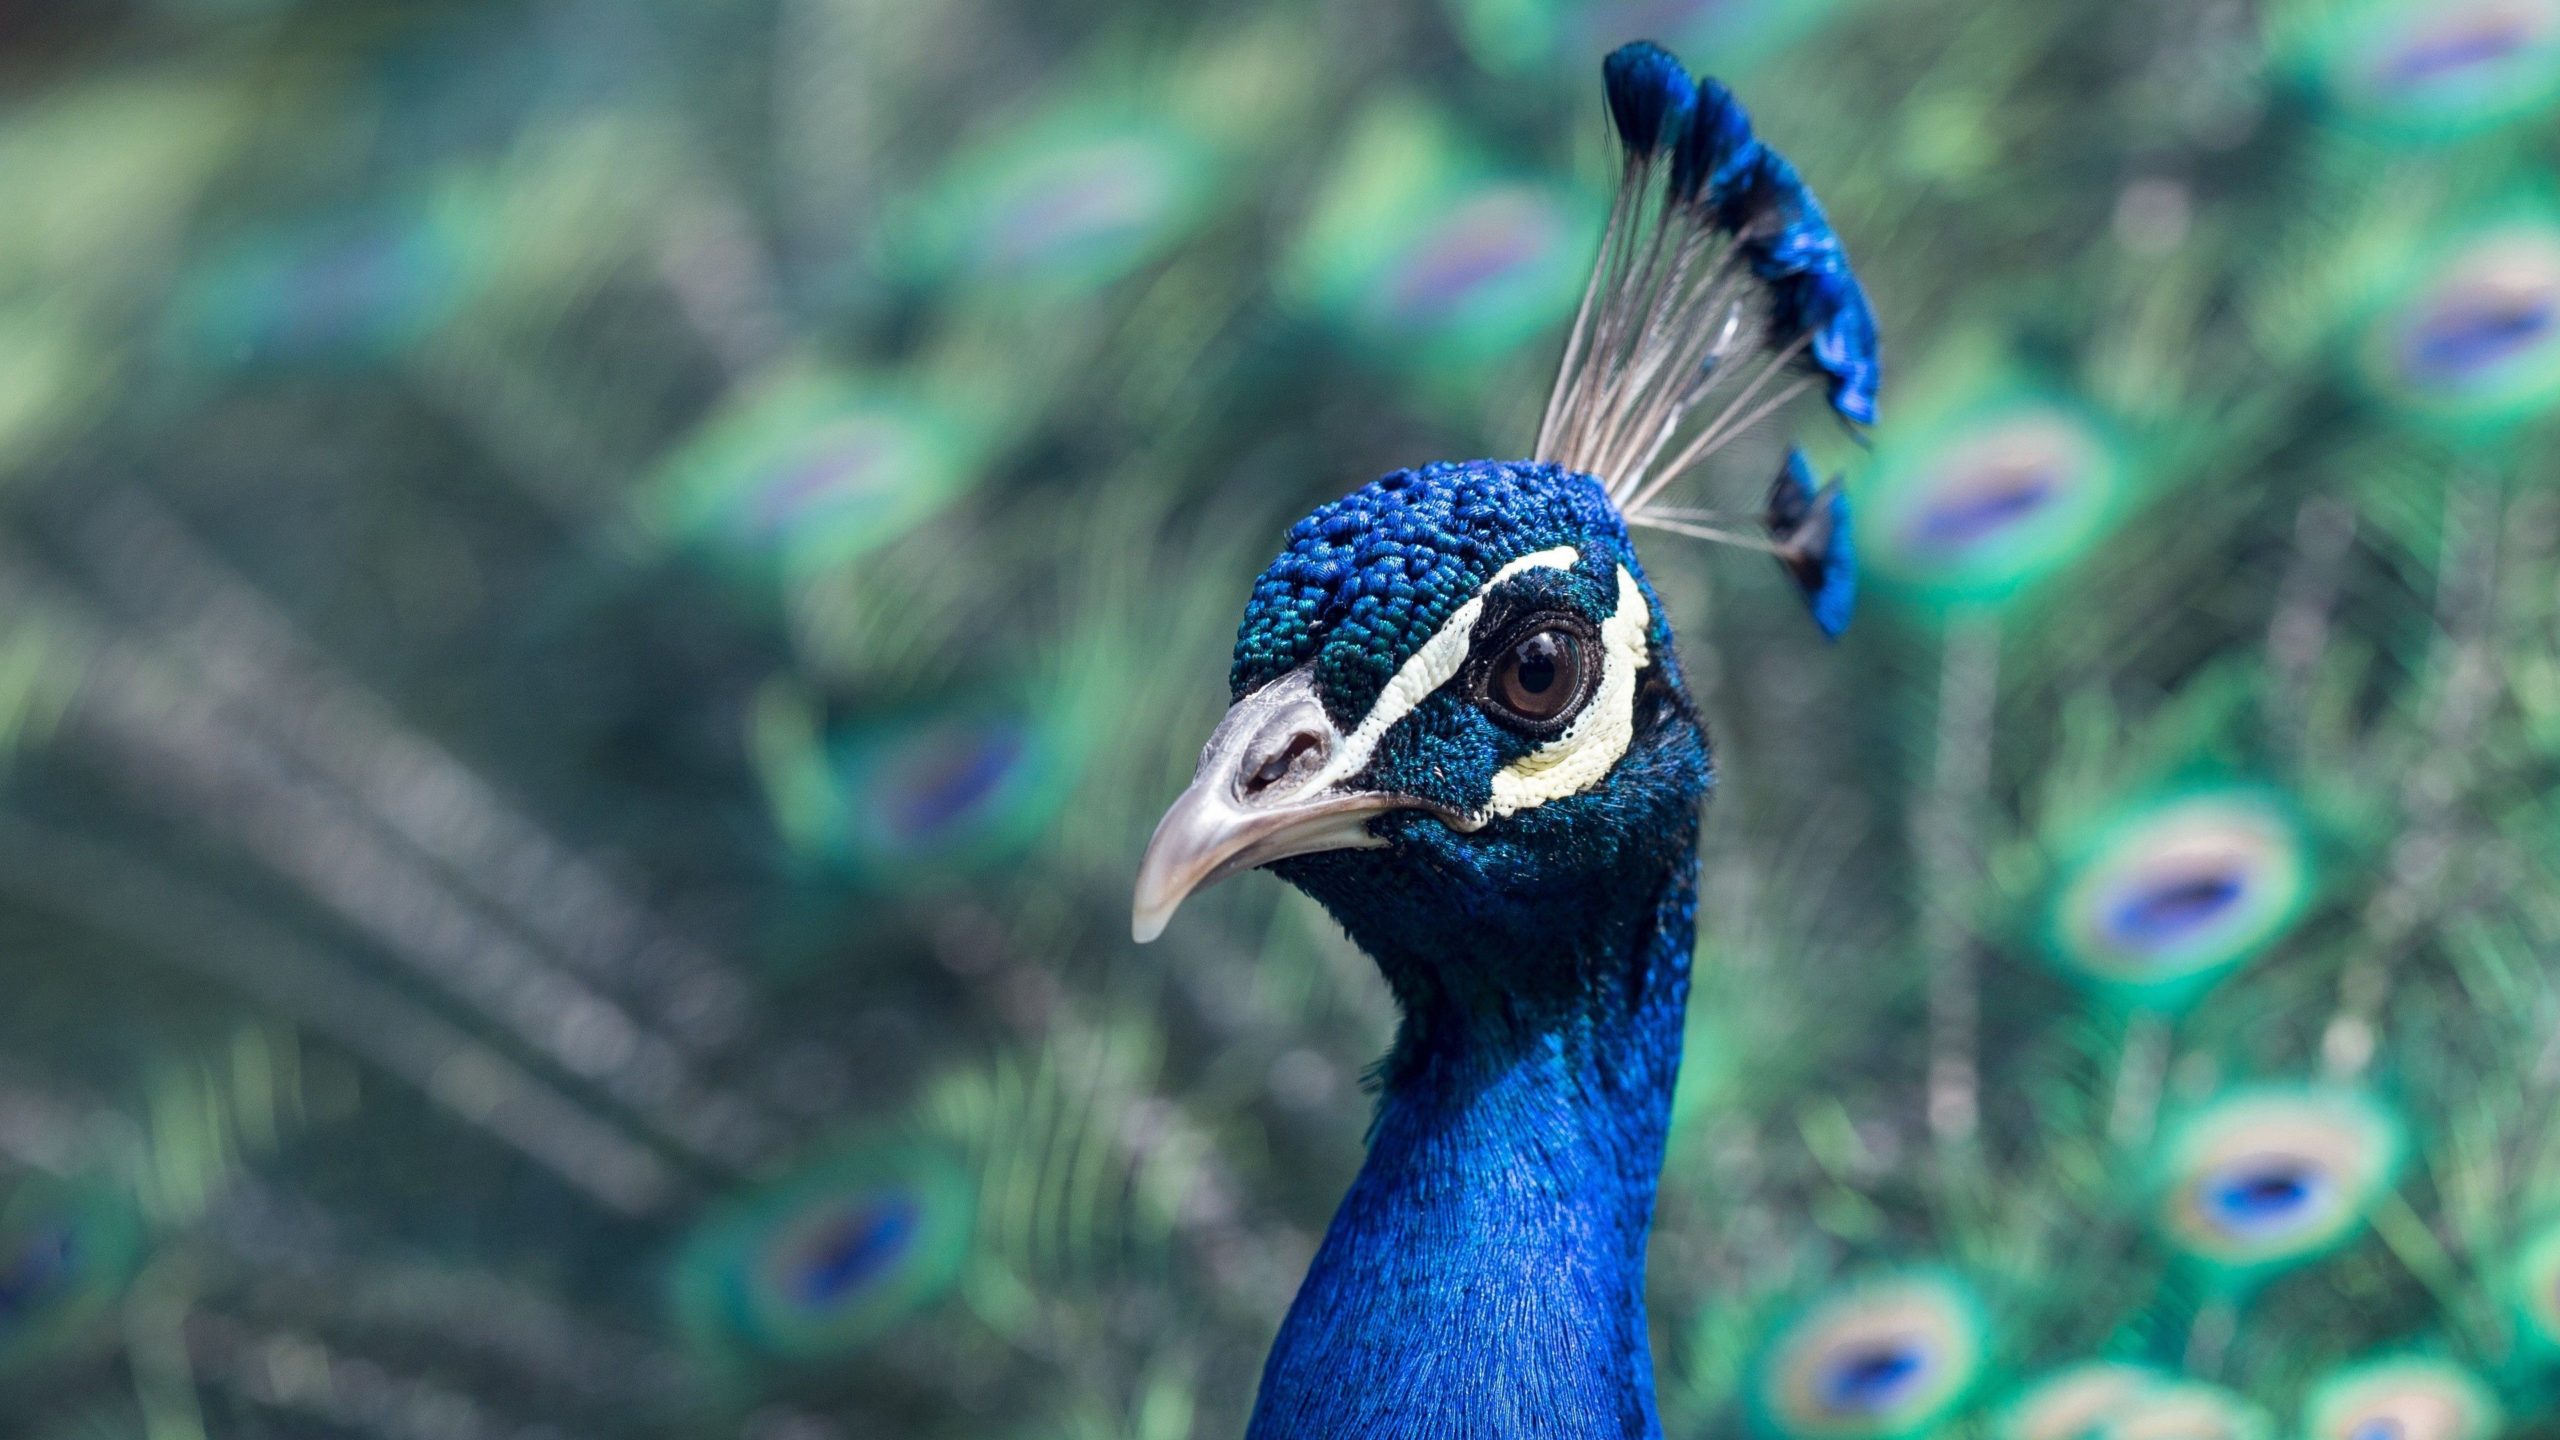 picture of a peacock hd